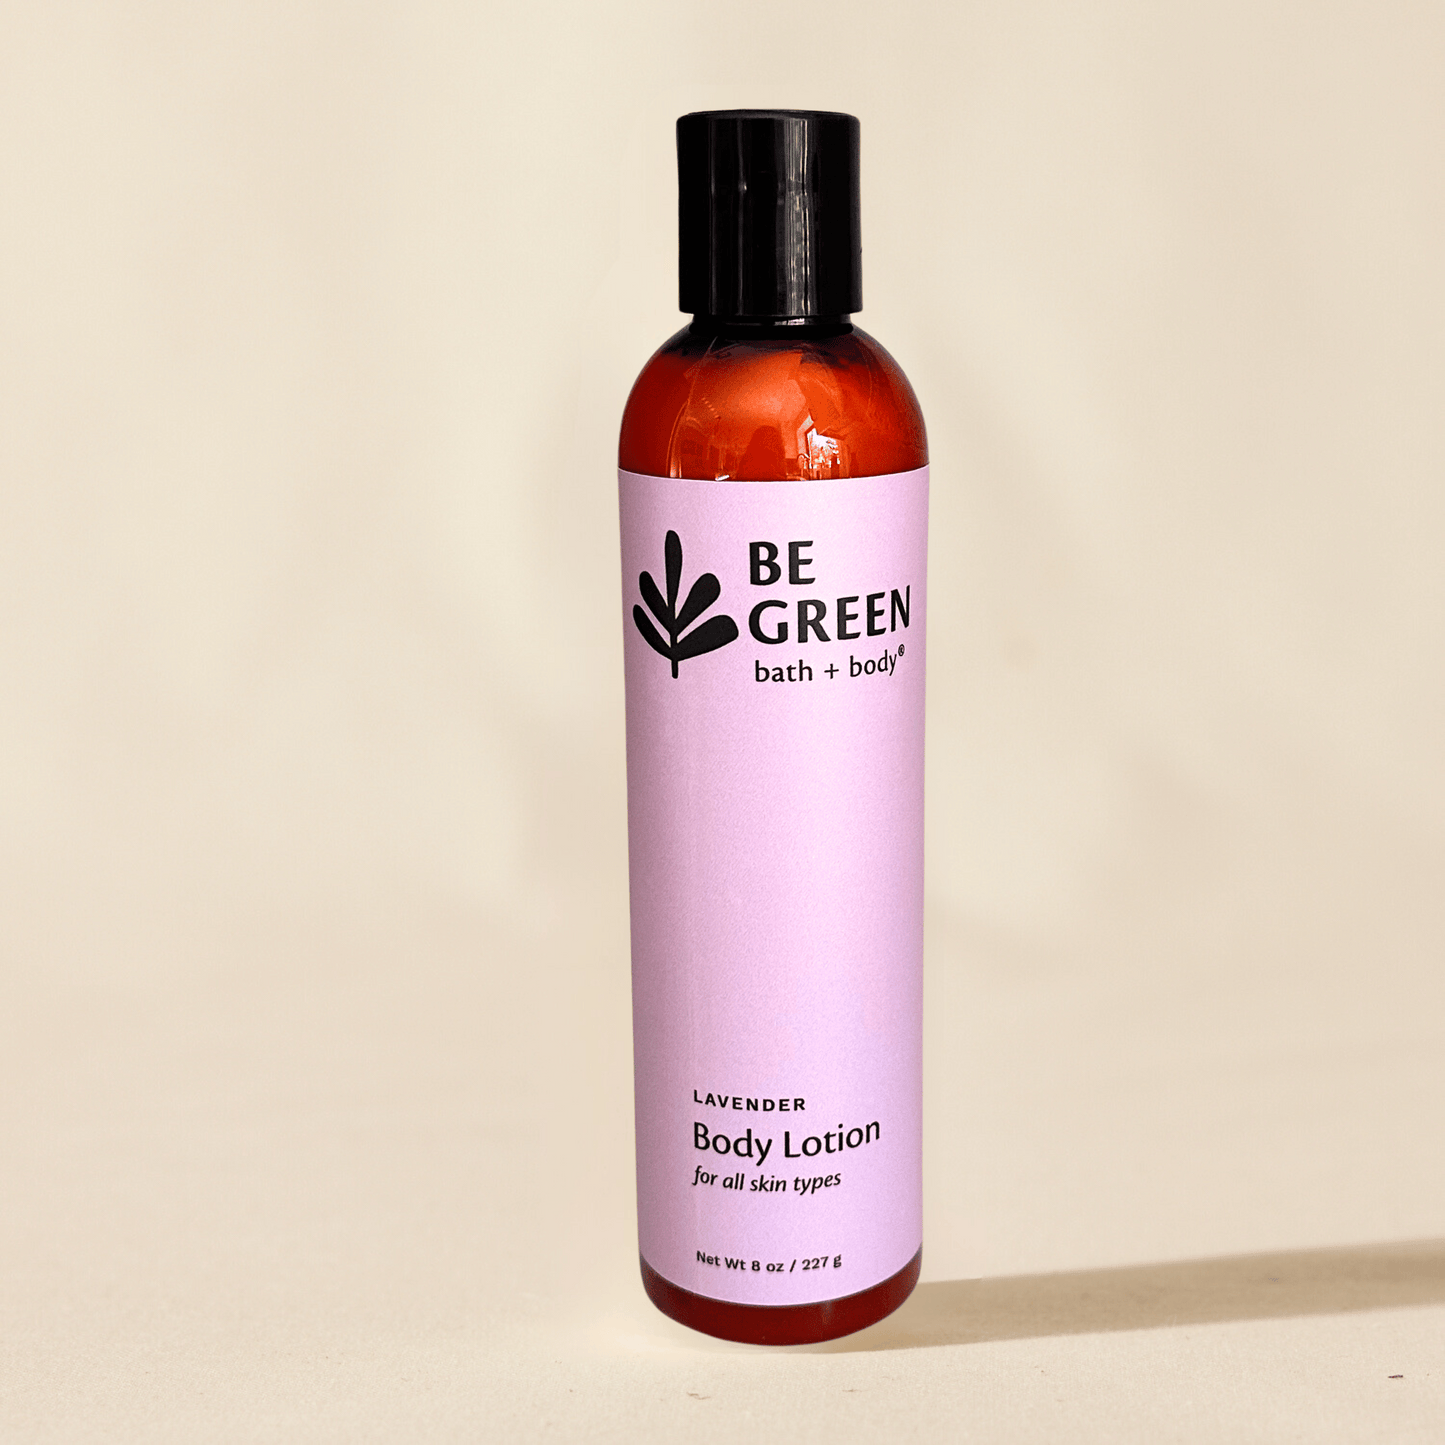 Lavender Body Lotion made with non toxic ingredients